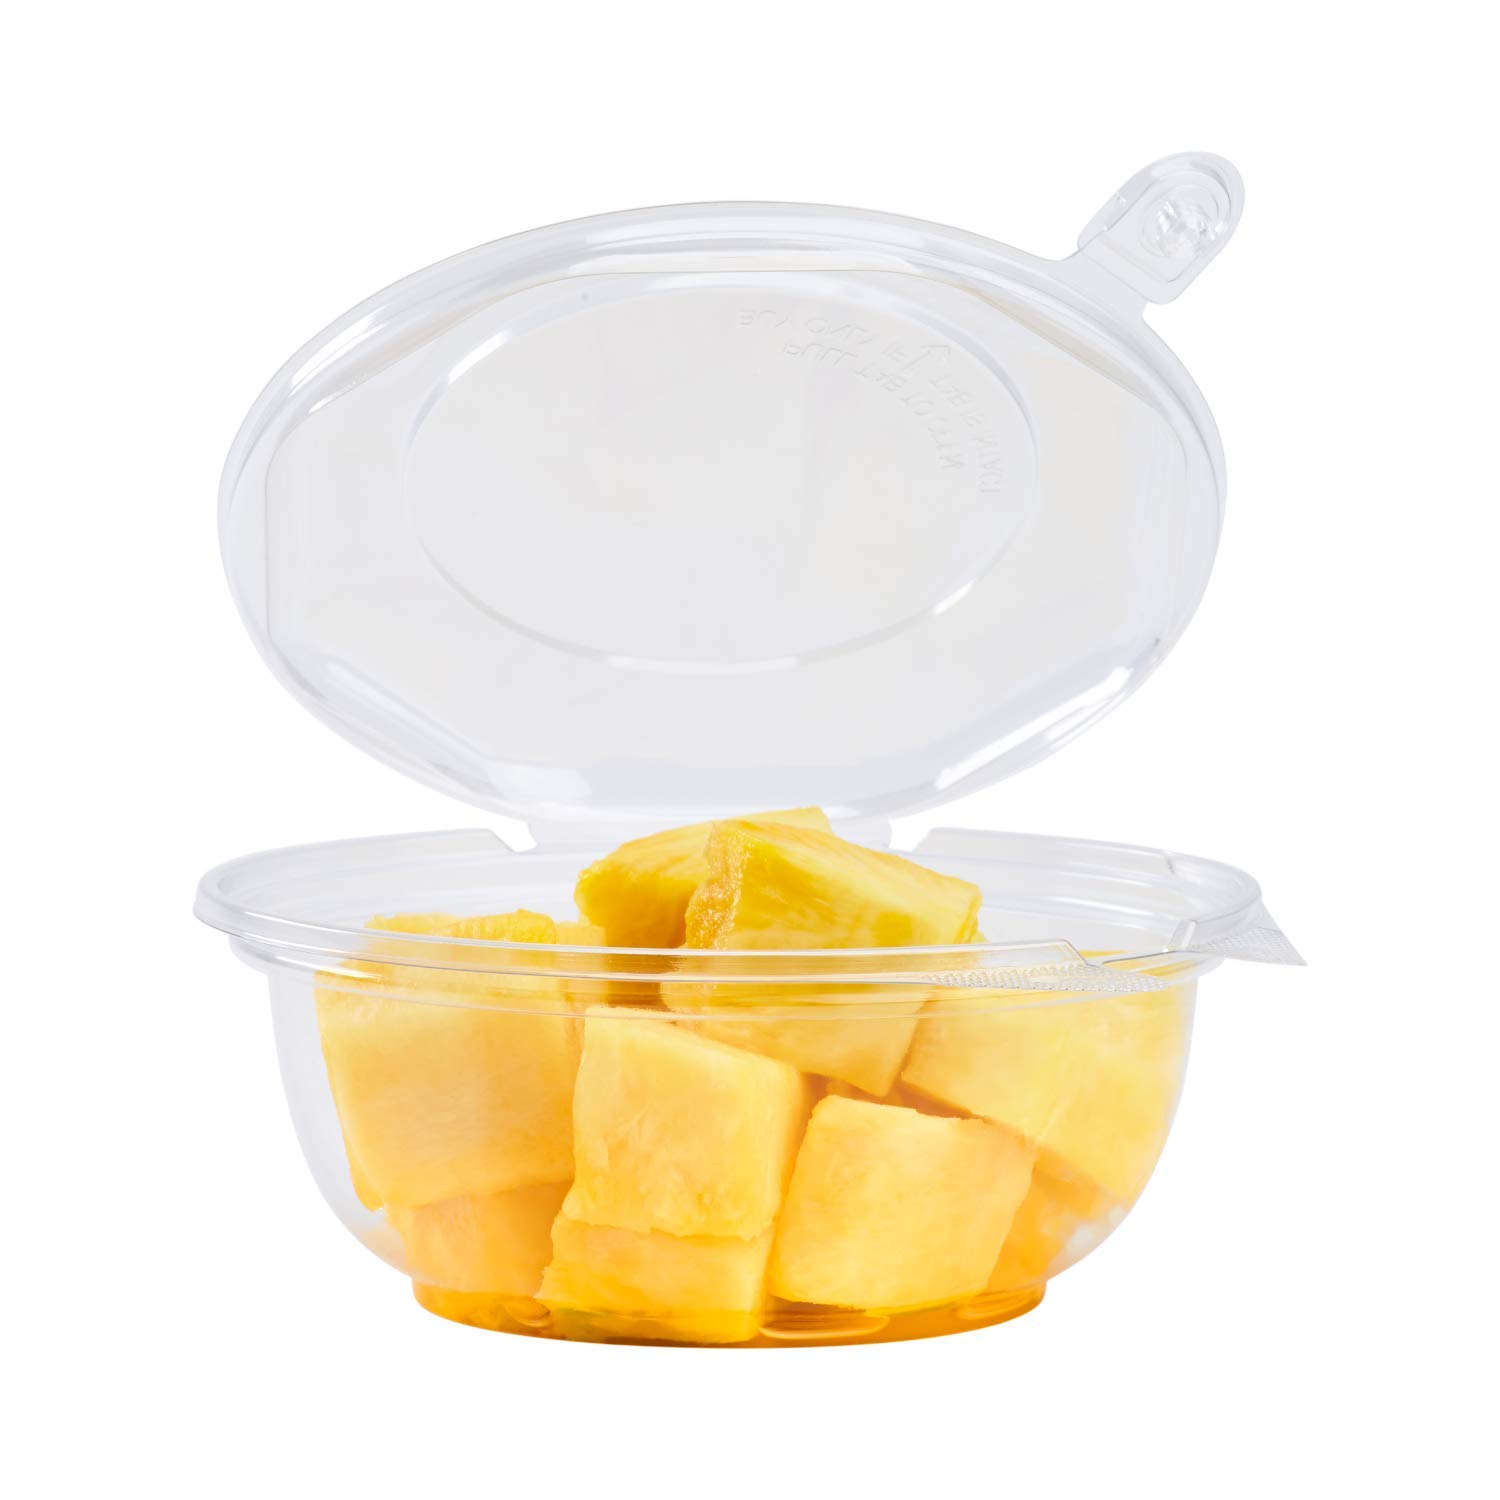 Karat 24oz PET Tamper-Proof Salad Bowls with Dome Lids - Clear, Recyclable, Freezer-Safe Containers (Pack of 240)